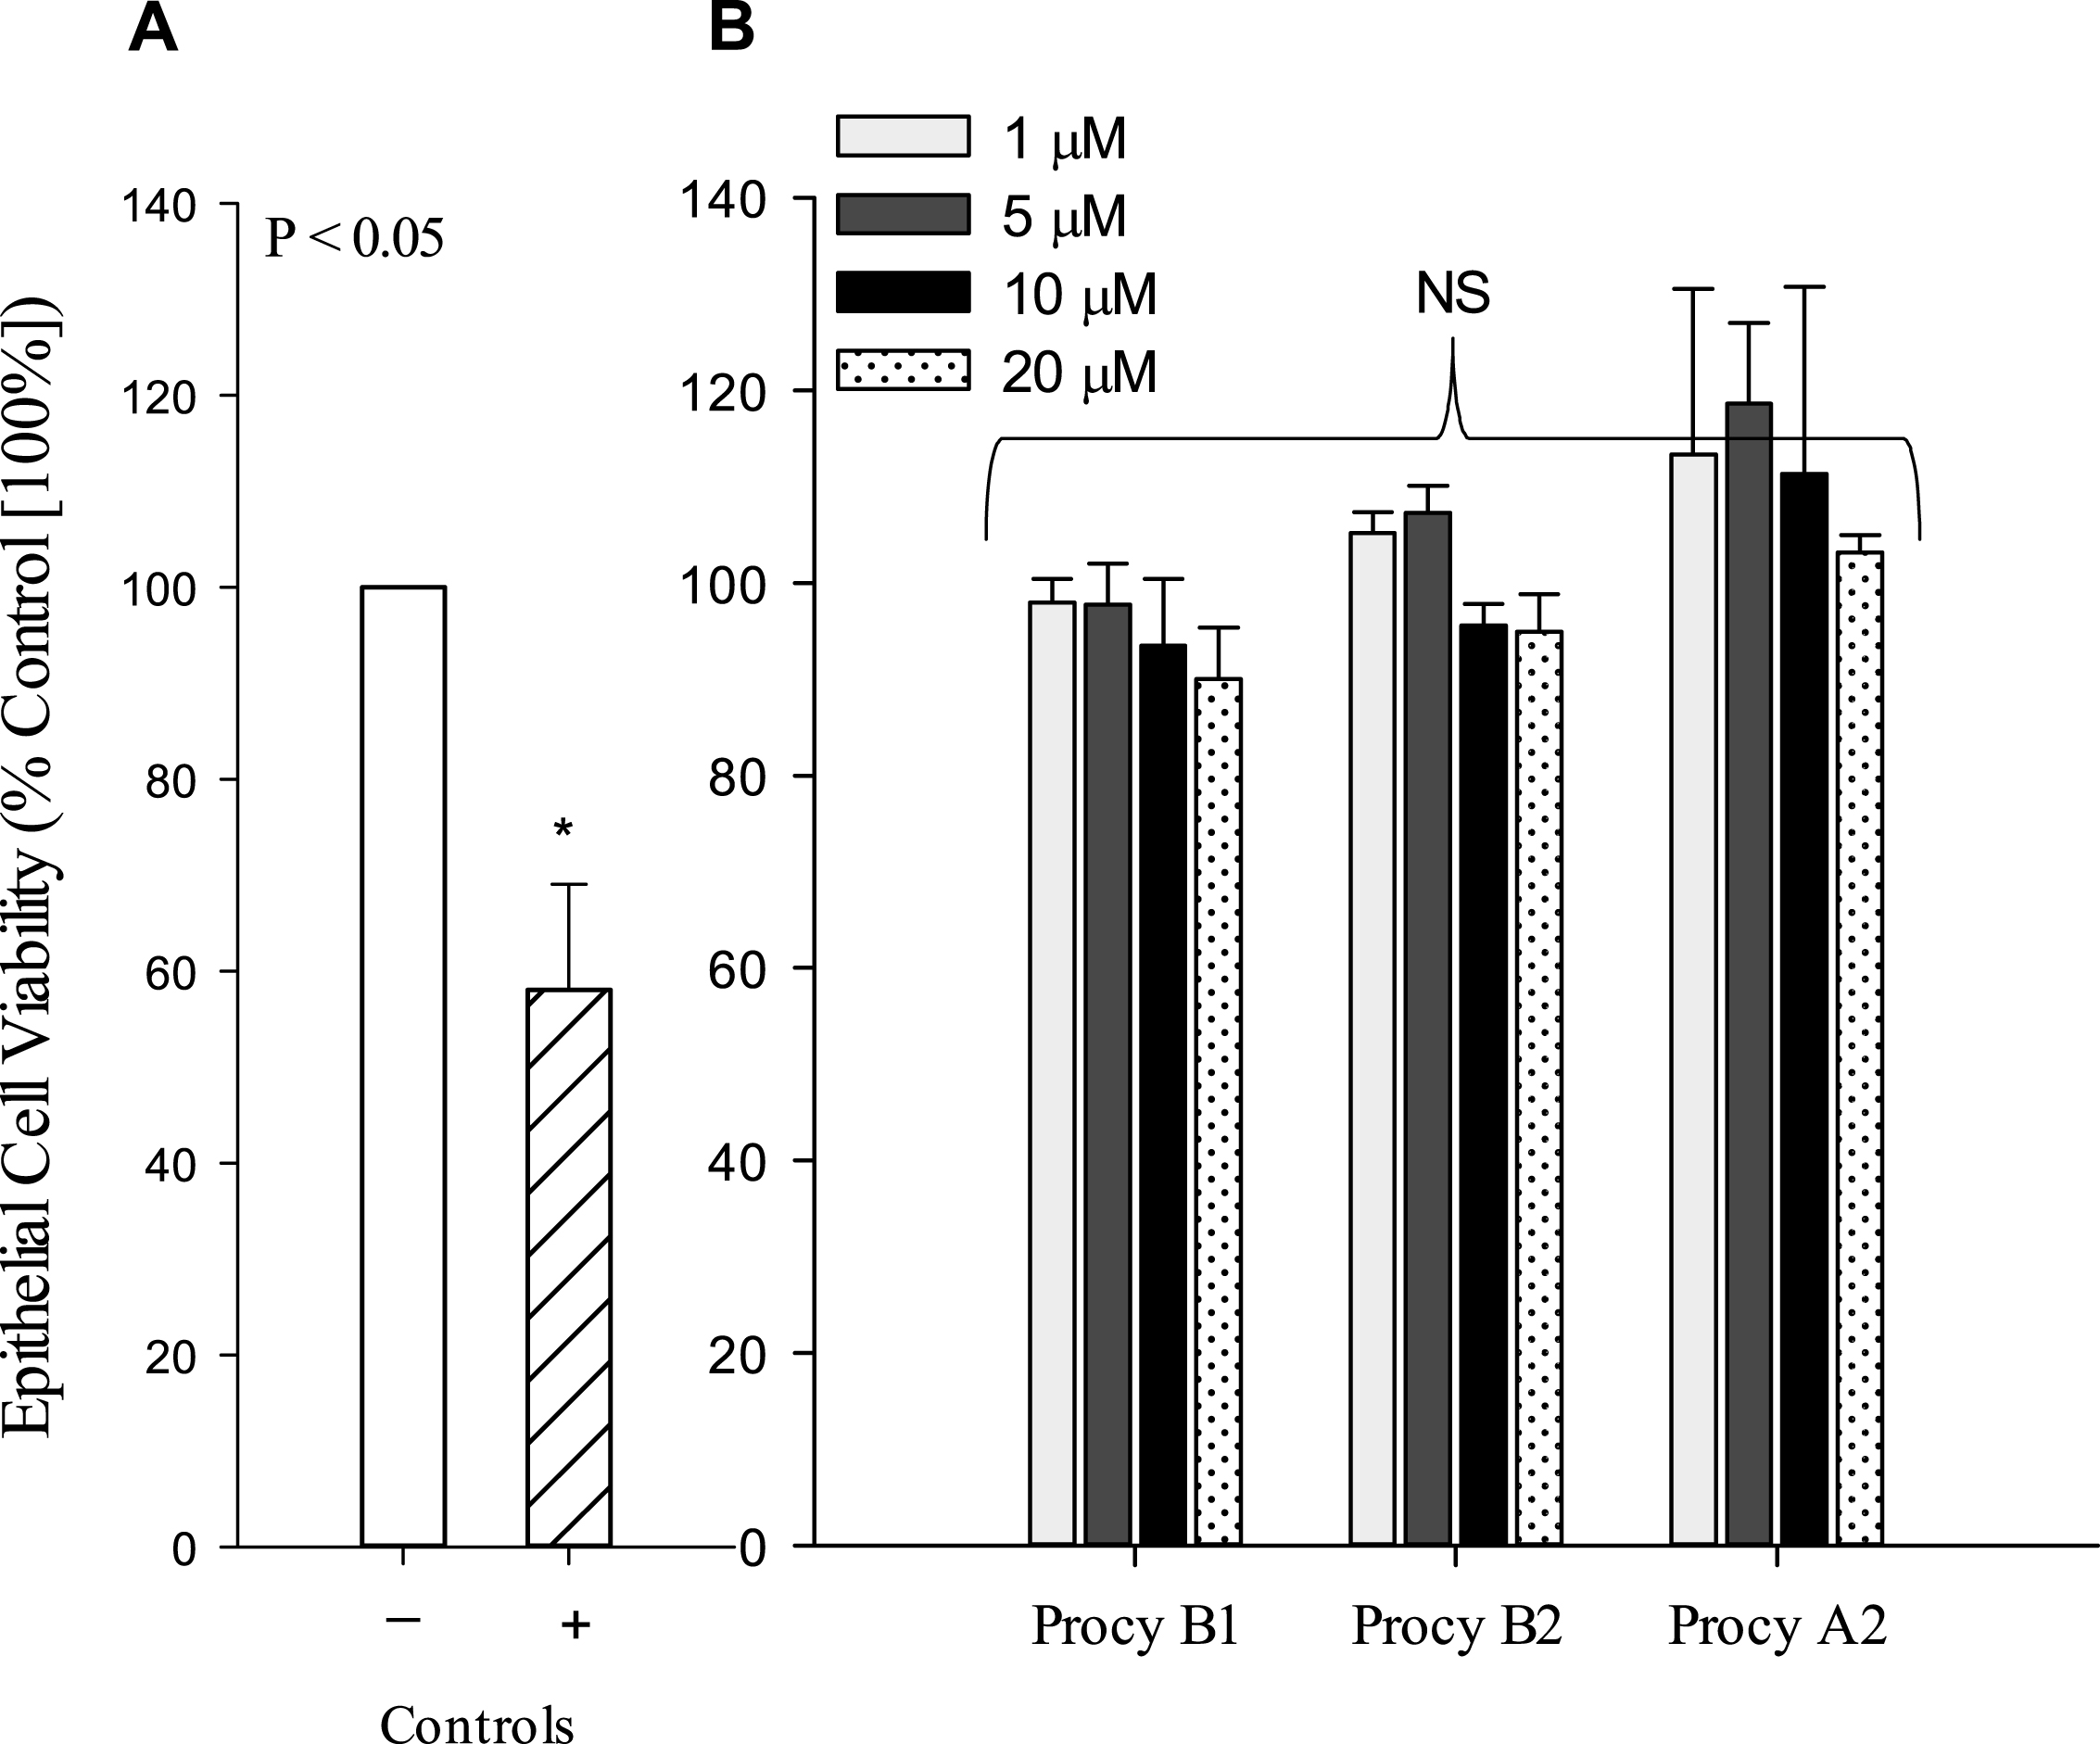 Effect of procyanidins on viability using a WST-1 Assay. A549 cells were incubated with A) negative (–) control media, or positive (+) control 2.5 mM H2O2 or B) procyanidin (Procy) B1, B2, or A2 for 6 h at 1 μM (light grey), 5 μM (grey), 10 μM (black), and 20 μM (speckled), washed with PBS and then assayed with WST-1 reagent for cellular viability. Results are expressed as means ± SEM as a percentage of the negative control [100%], n = 3 separate experiments. NS = not statistically significant.